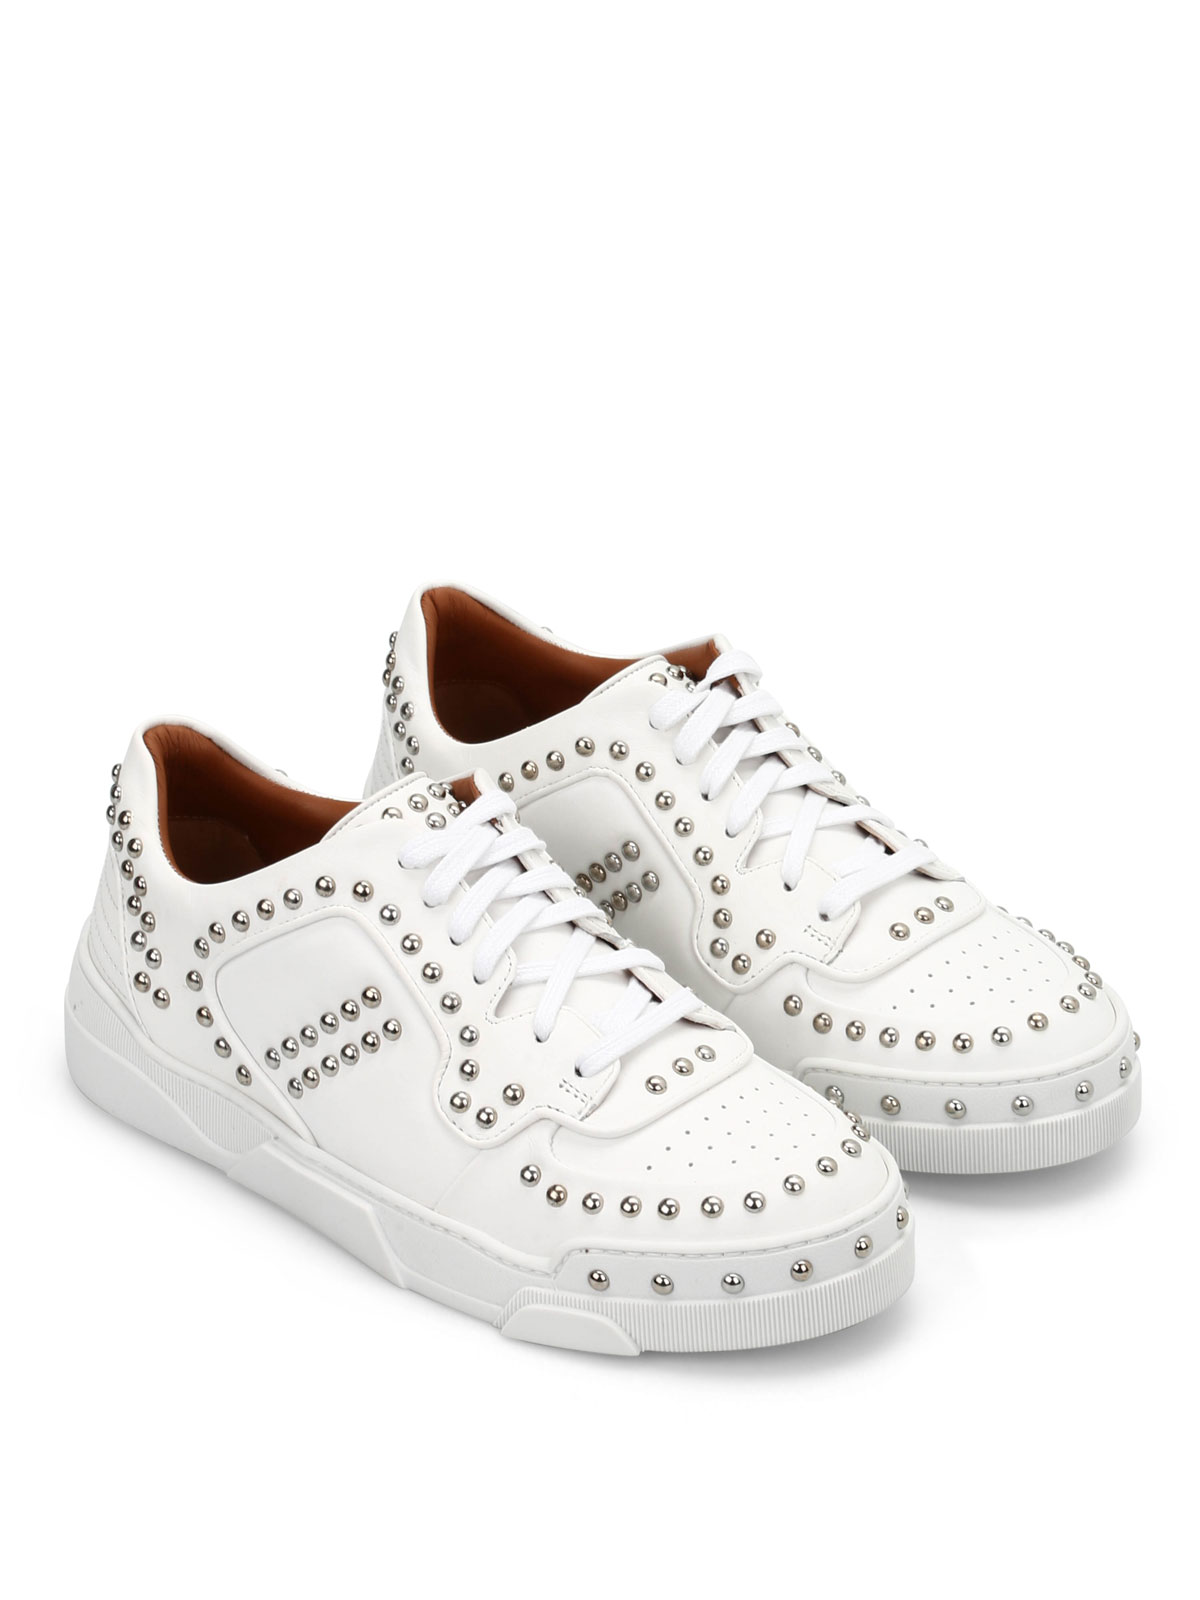 Givenchy - Tyson II studded sneakers - trainers - BE08757158100